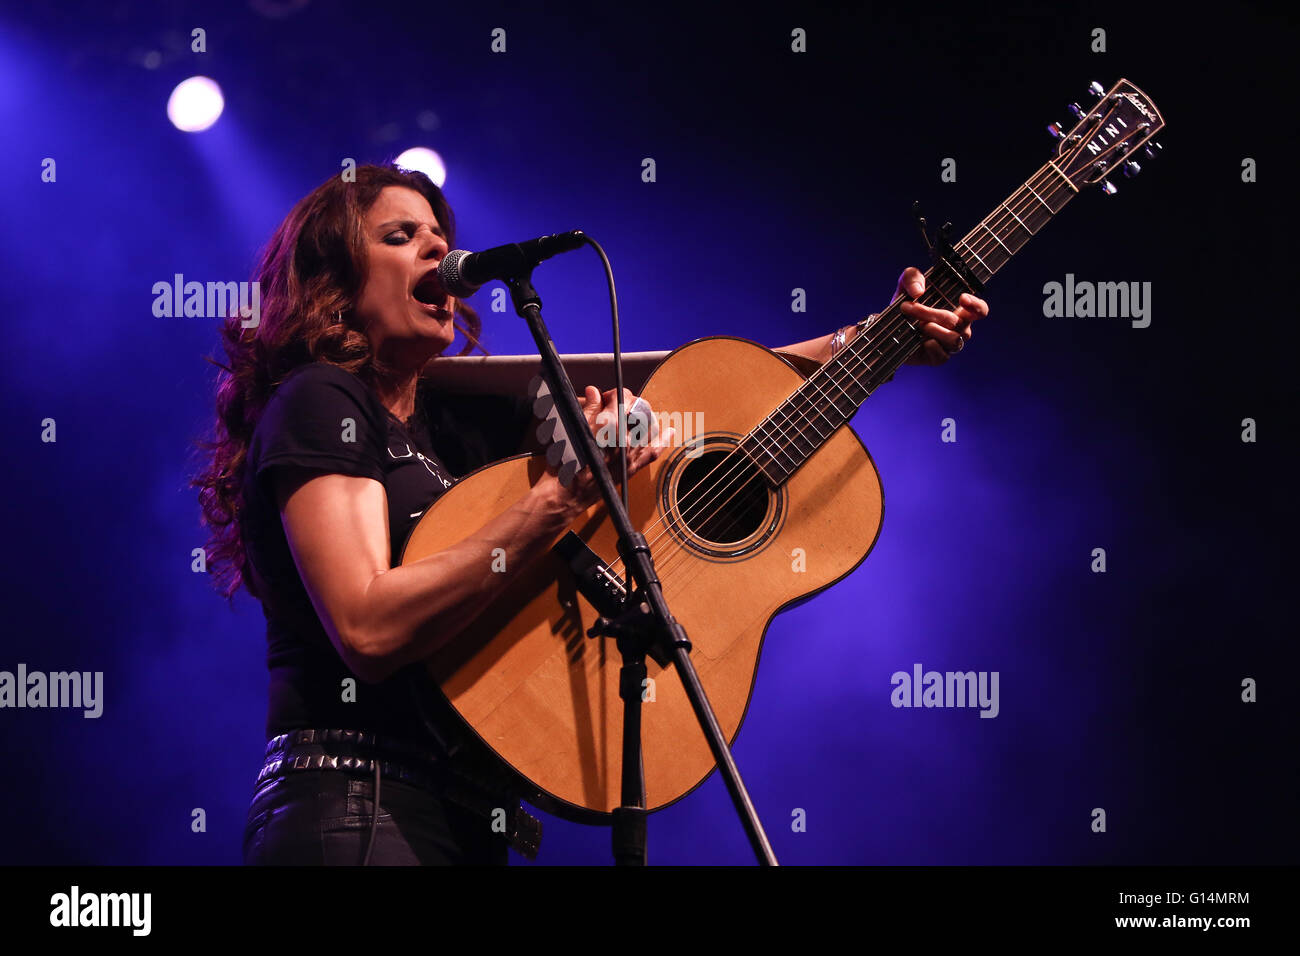 NEW YORK-MAY 6: Singer Nini Camps of Antigone Rising performs onstage at the Paramount on May 6, 2016 in Huntington, New York. Stock Photo